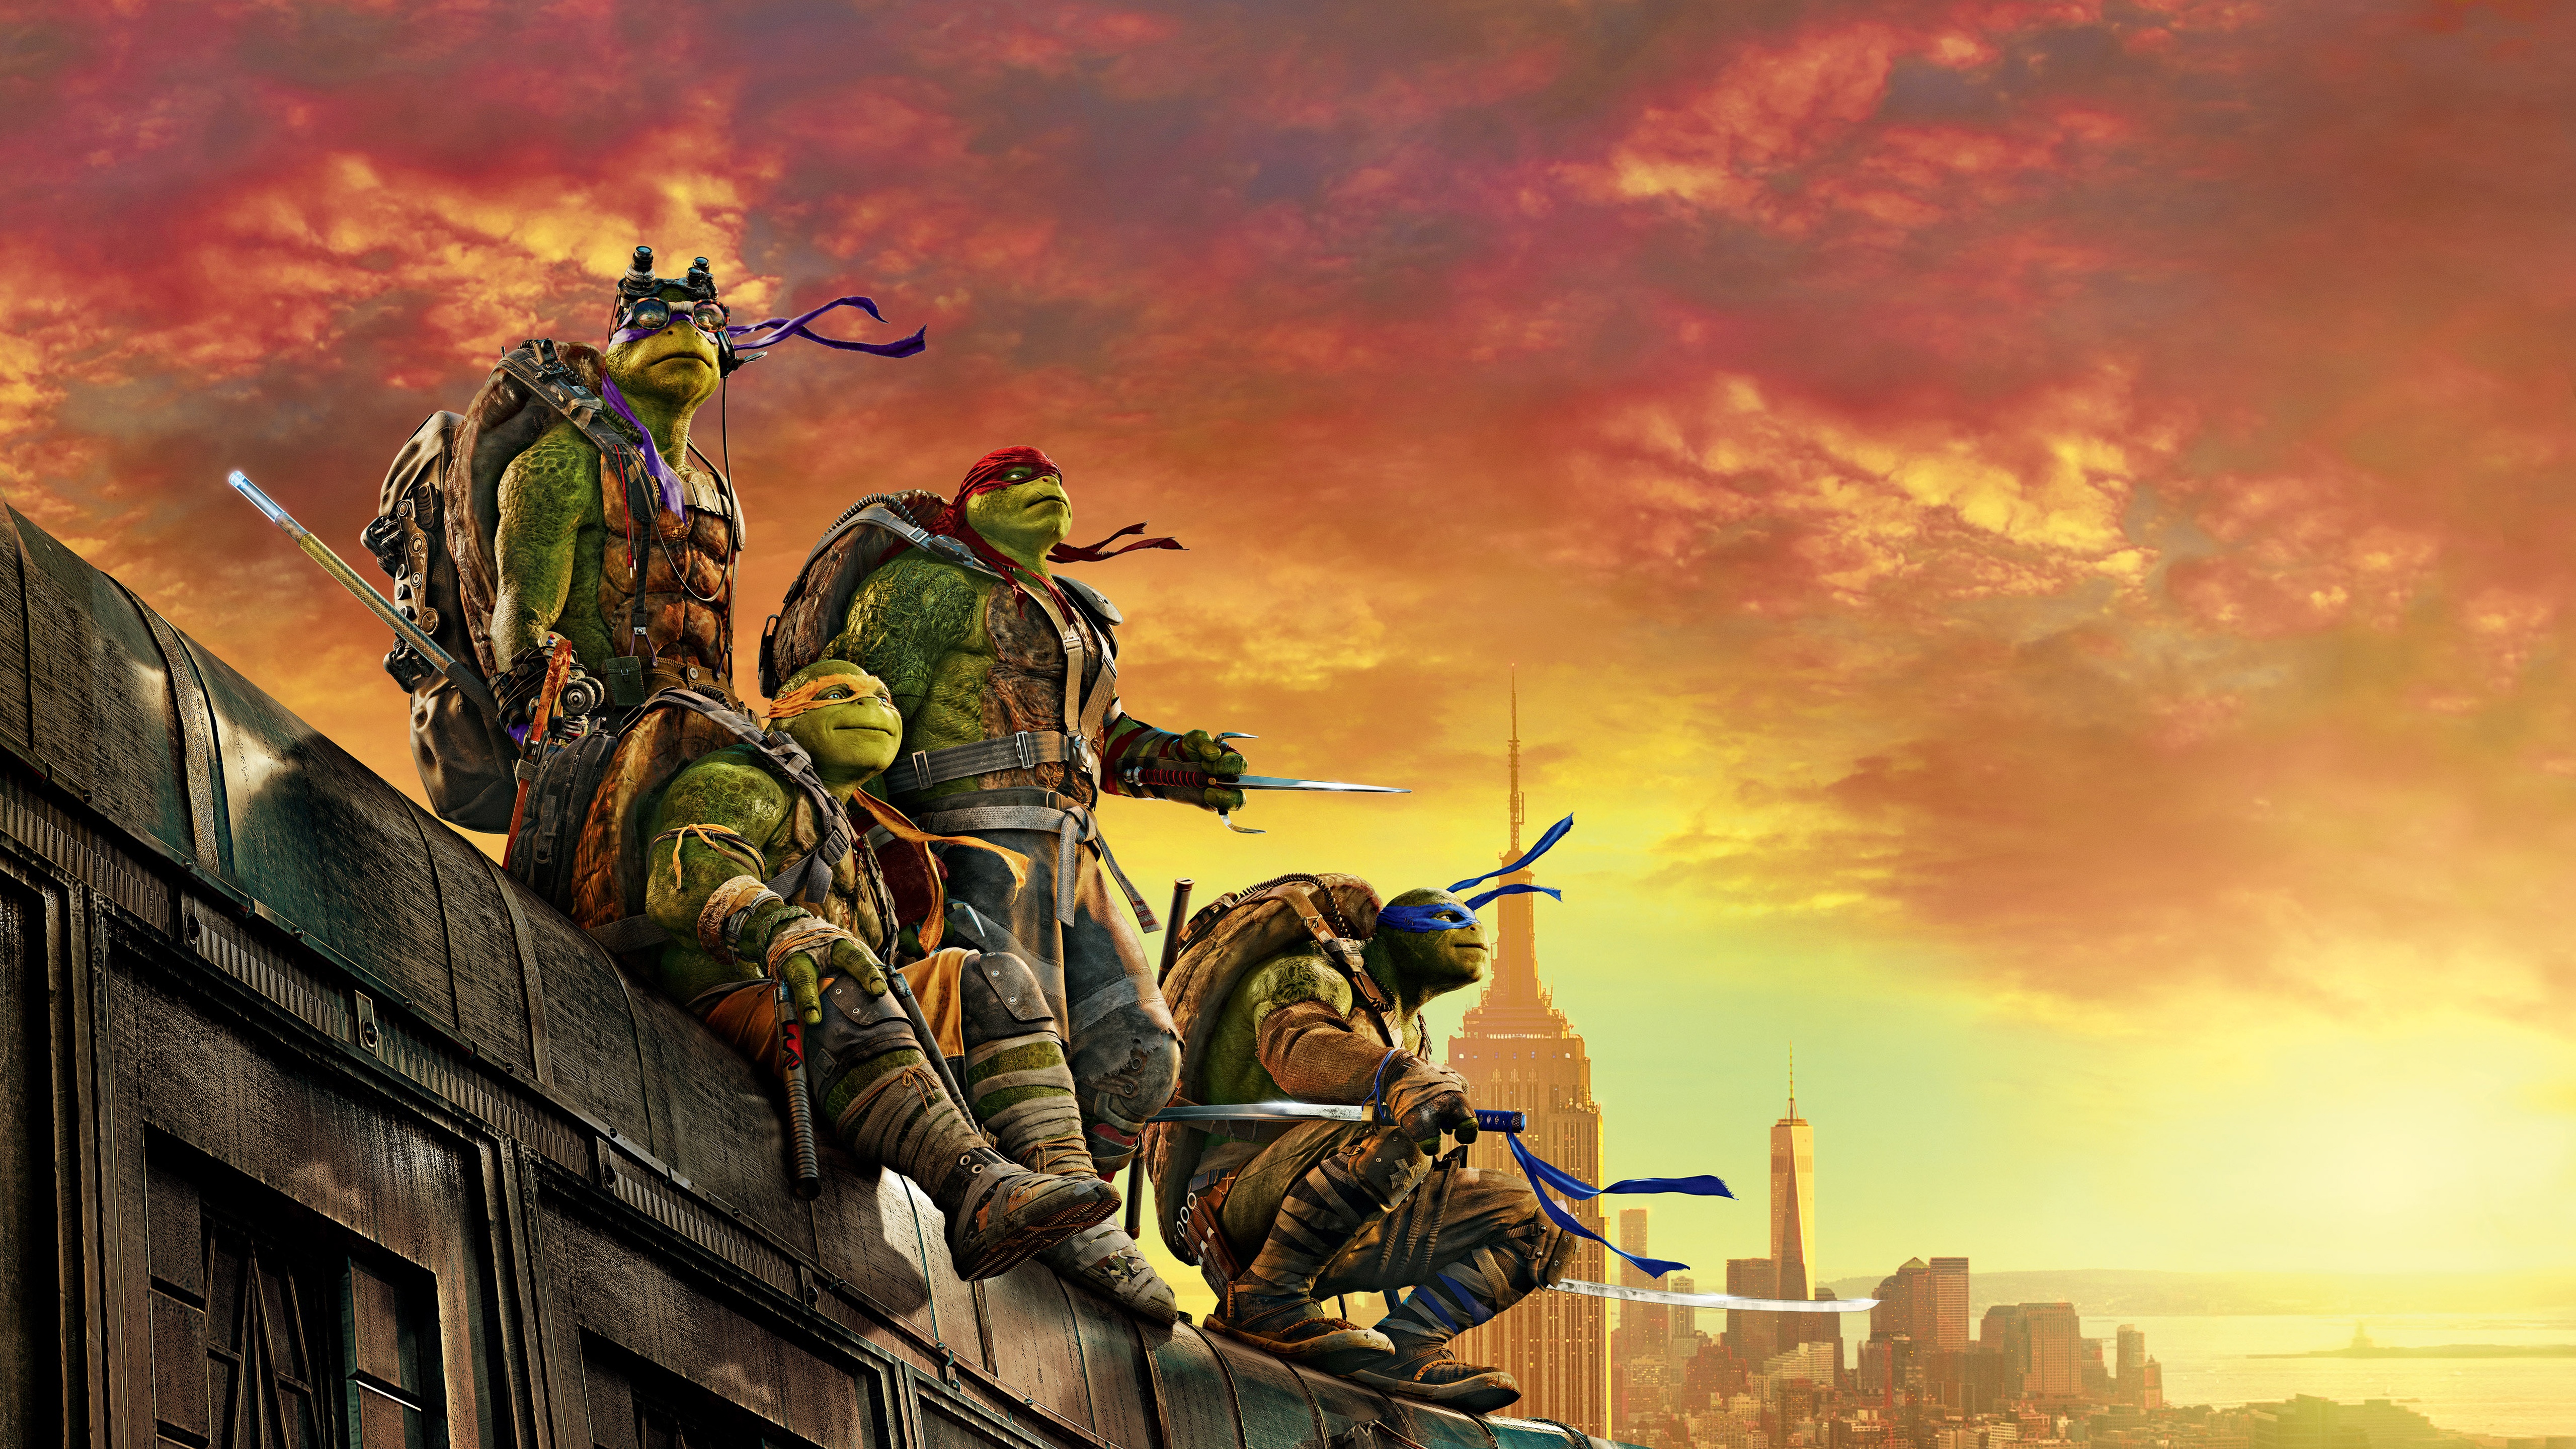 HQ Teenage Mutant Ninja Turtles: Out Of The Shadows Background Images